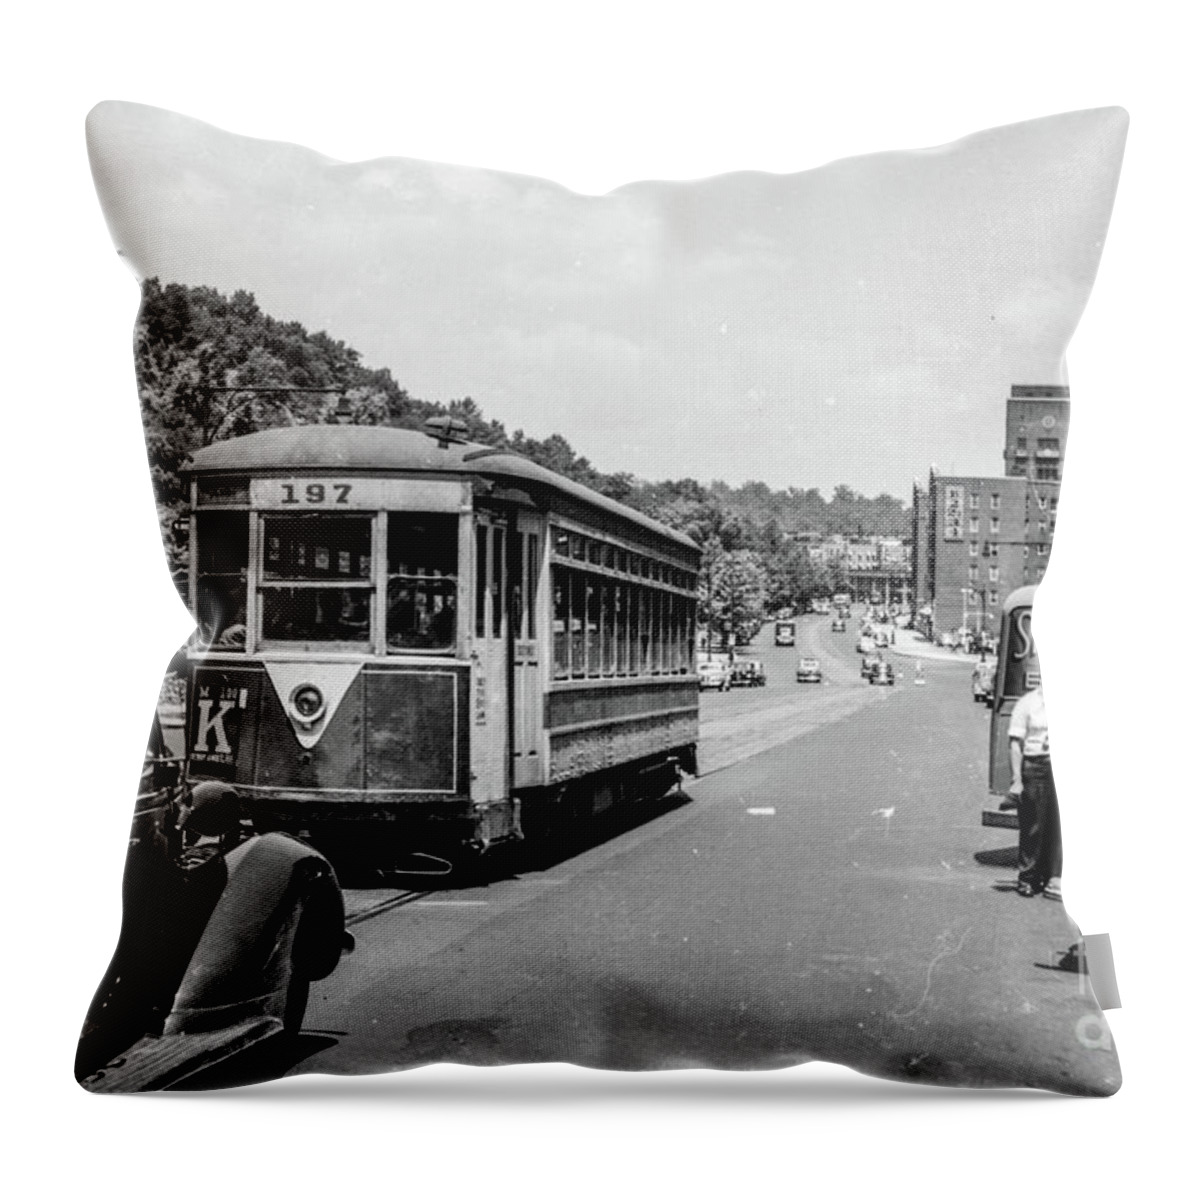 1940's Throw Pillow featuring the photograph Uptown Trolley near 193rd Street by Cole Thompson